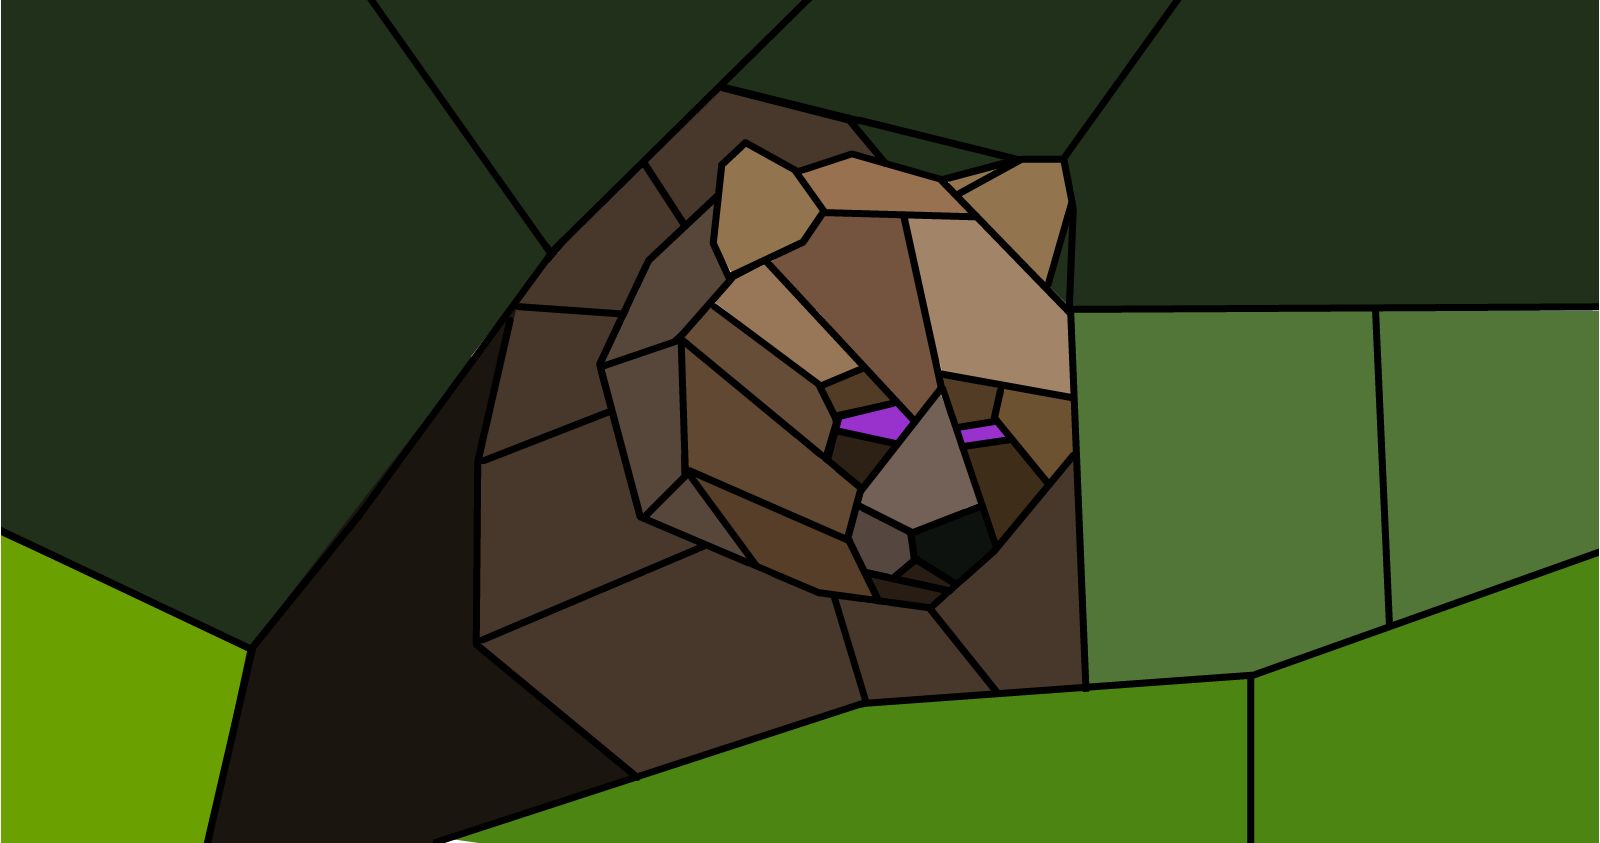 drawing of a schematic bear on green background